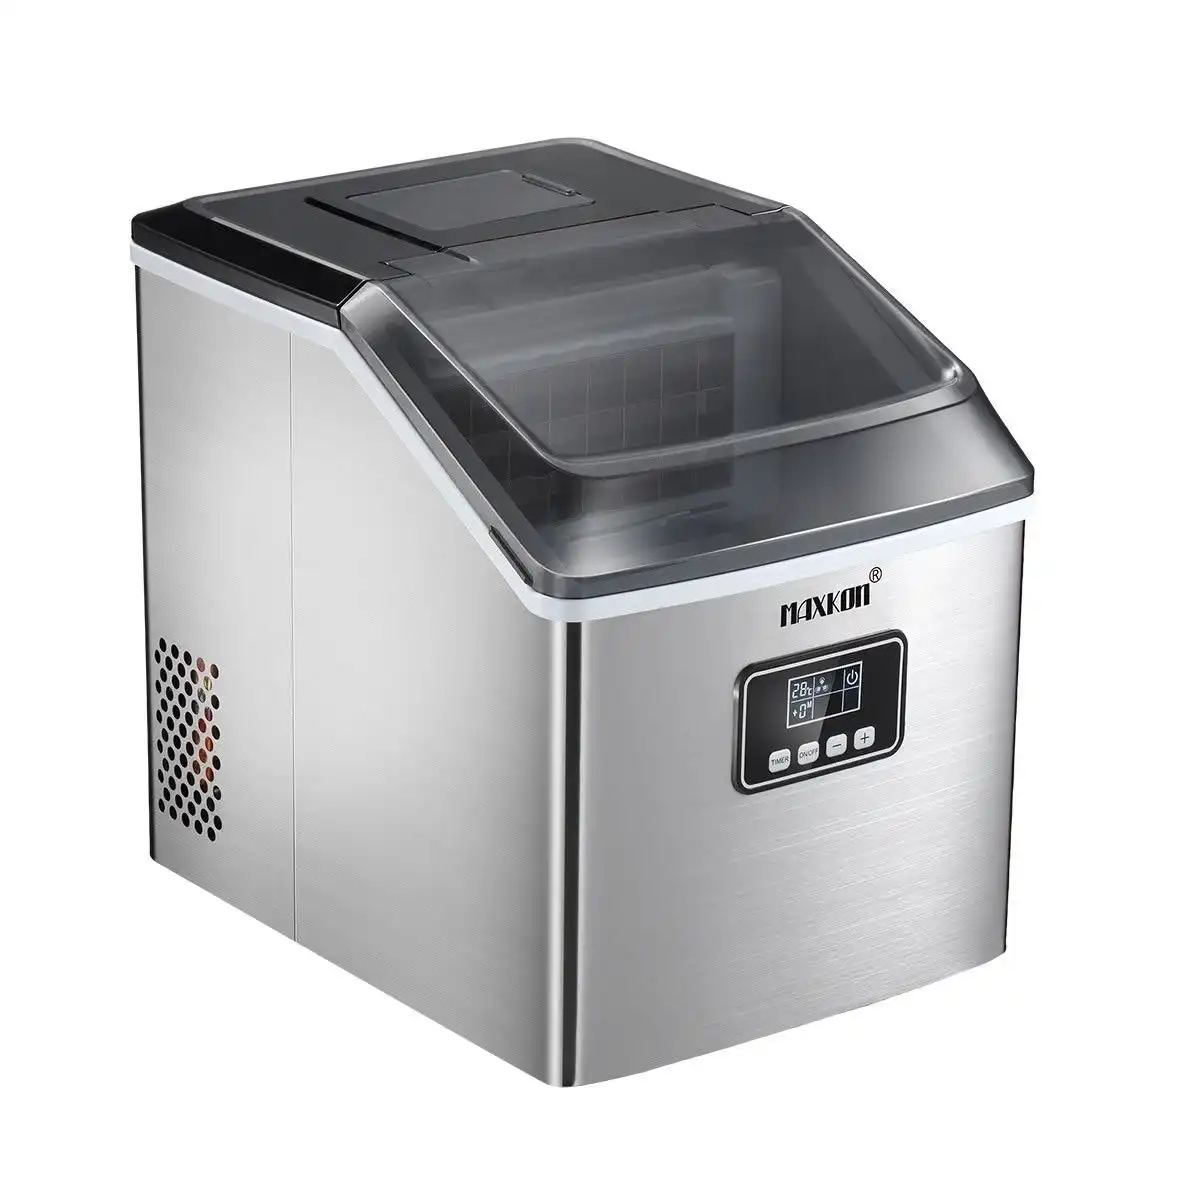 Maxkon  17 Kg Home Ice Maker Machine Stainless Steel Countertop Appliance-Silver